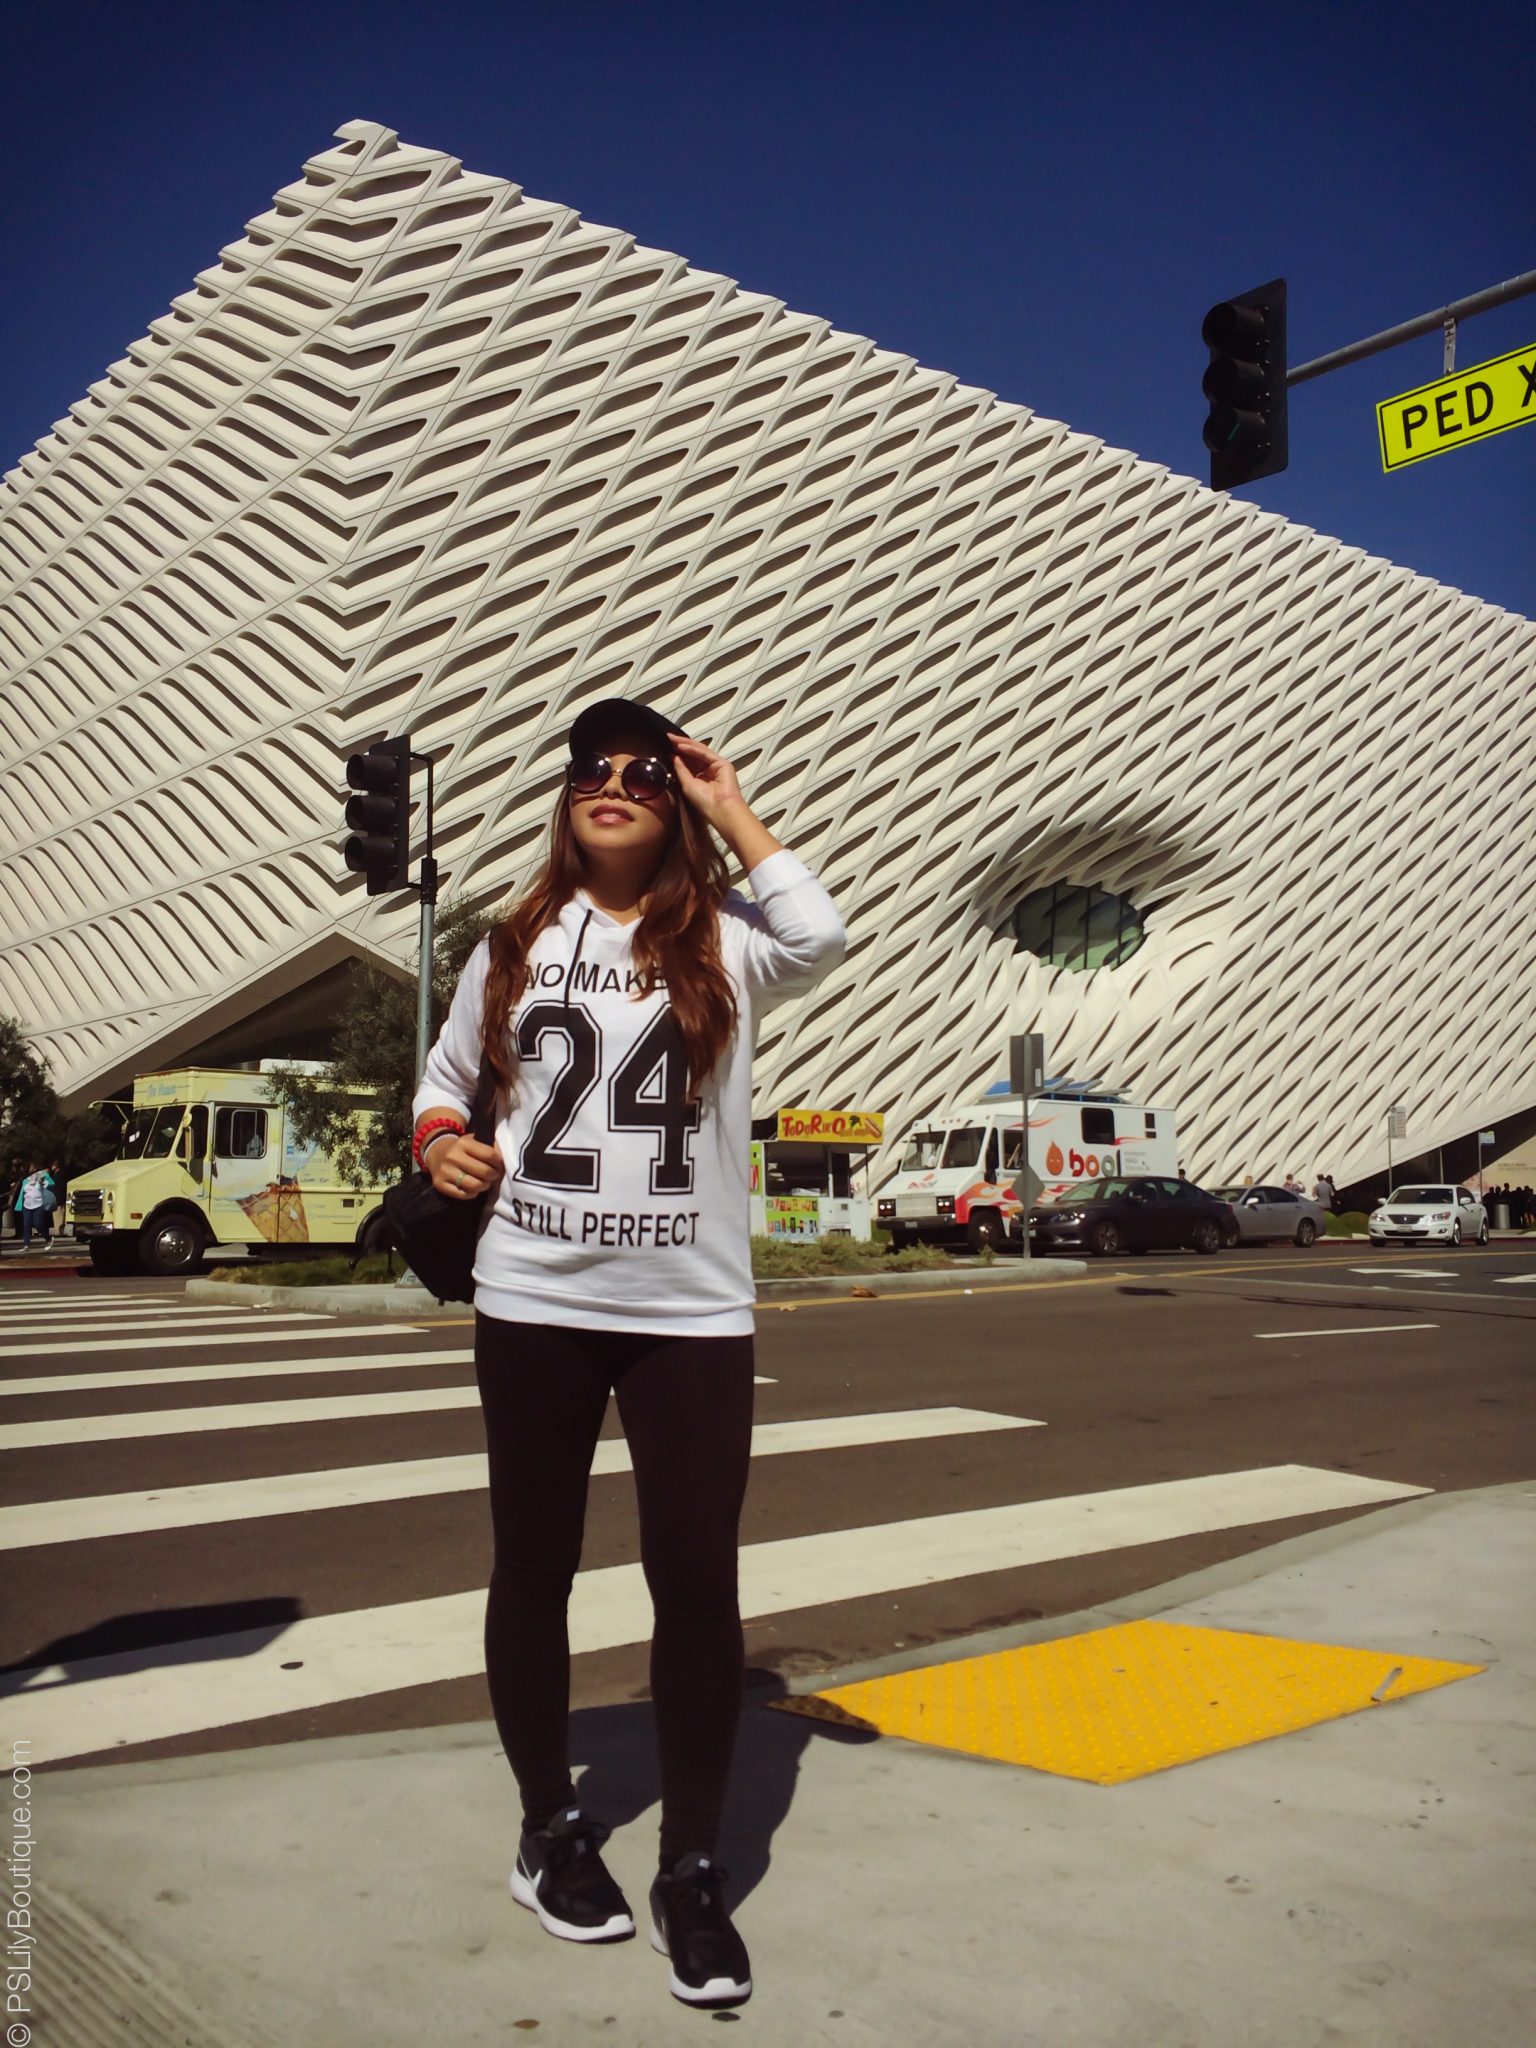 instagram-pslilyboutique-los-angeles-fashion-blogger-the-broad-museum-Nike-shoes-lookbook-2-22-16